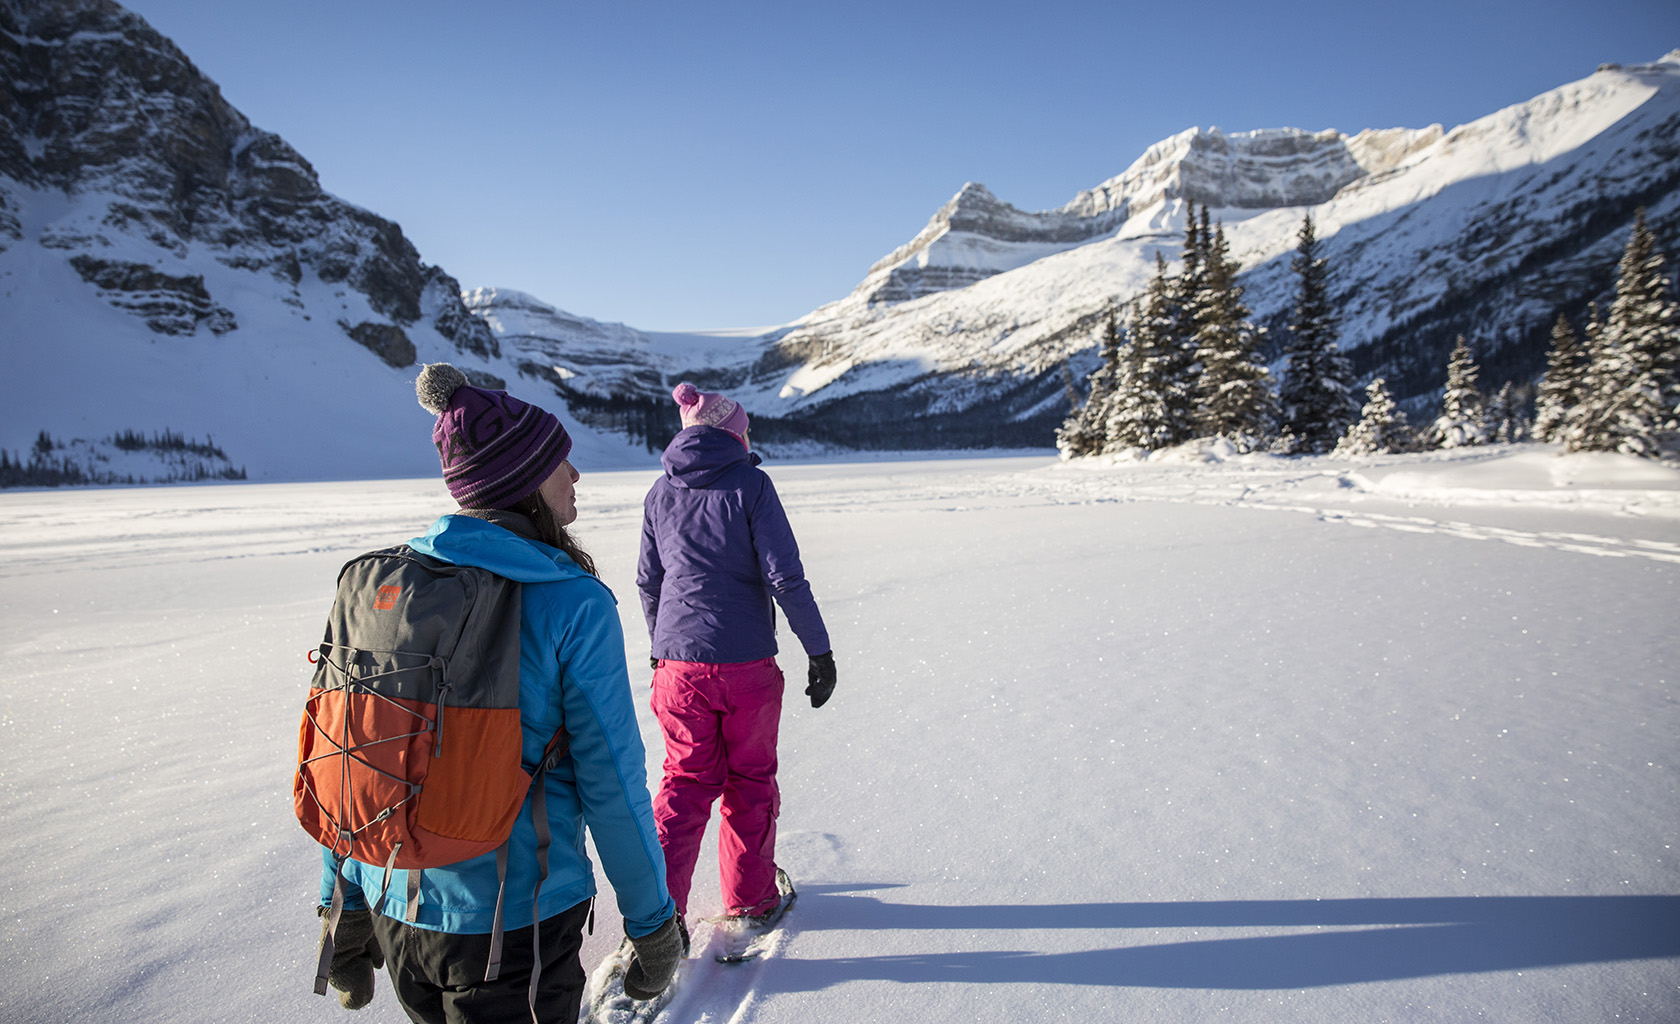 Snow shoeing in Banff National Park